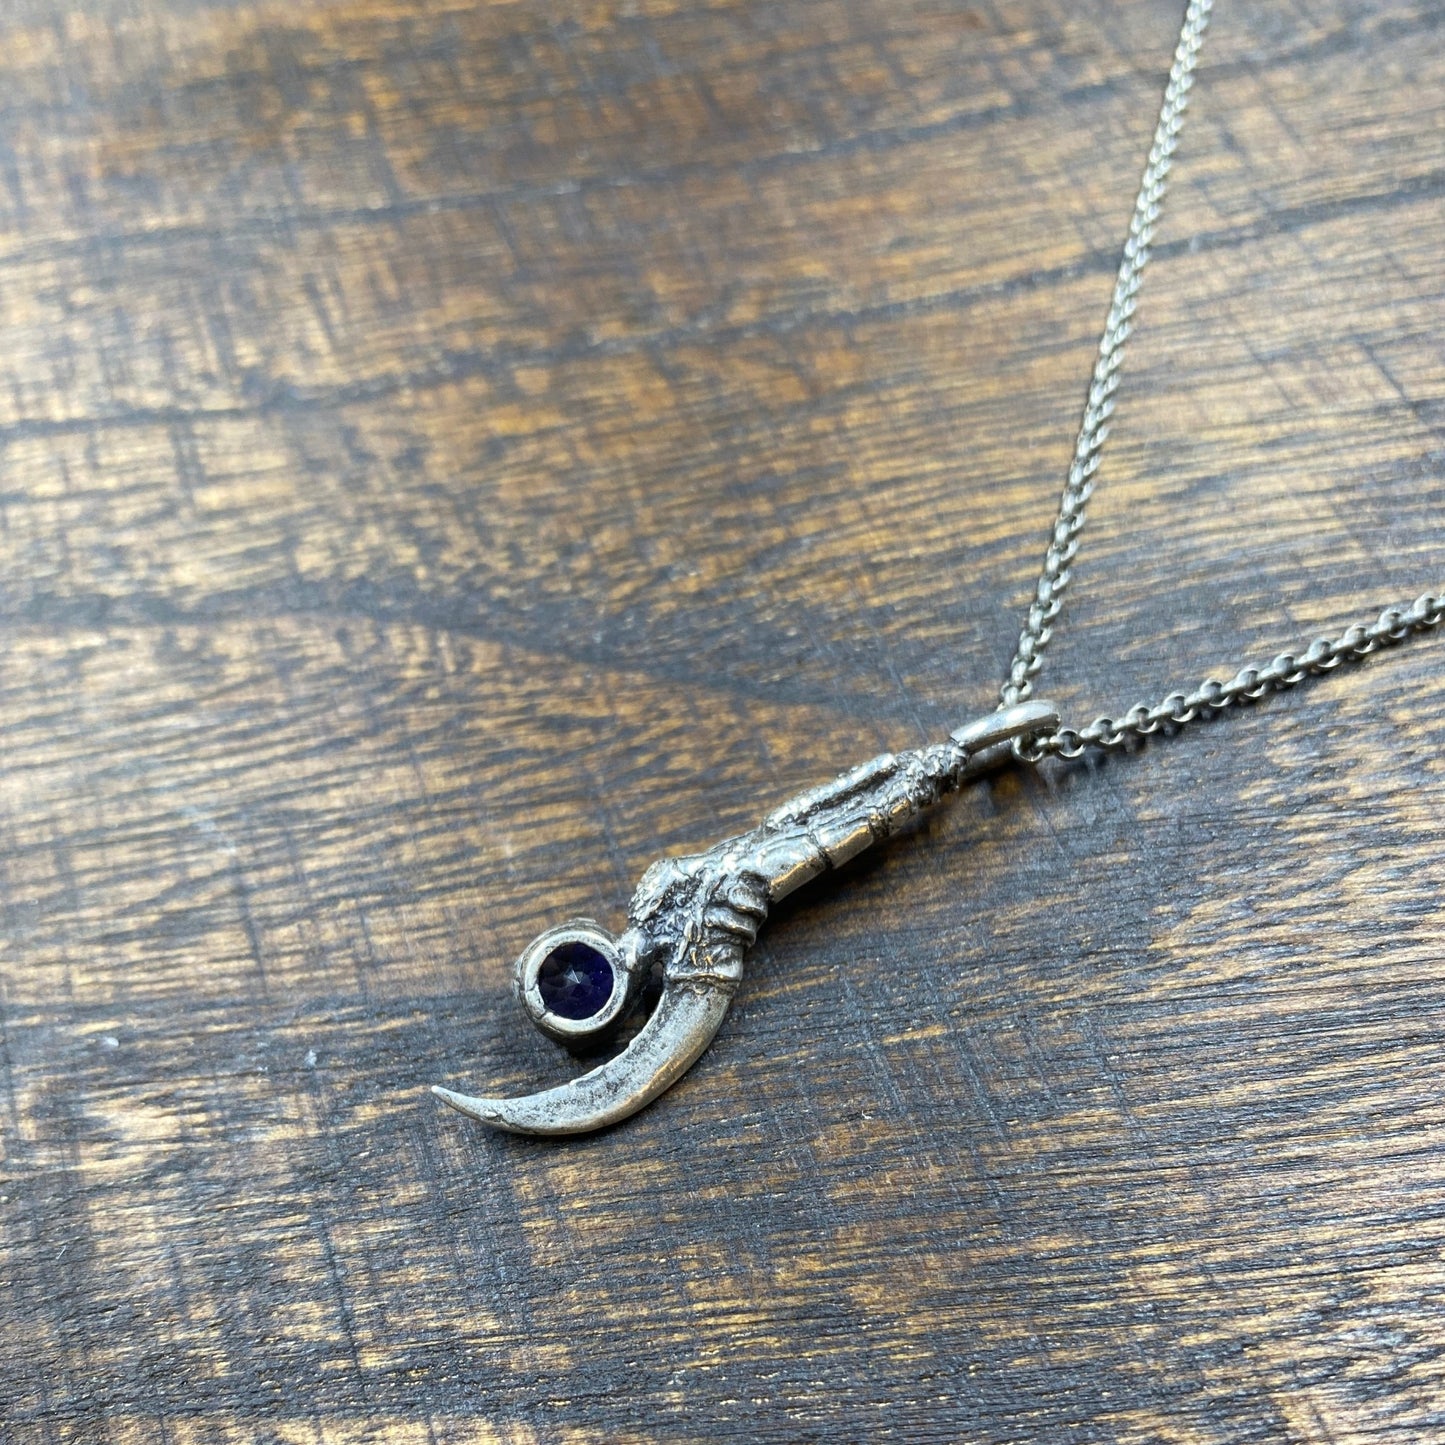 Large Silver Crow Talon Necklace with Iolite